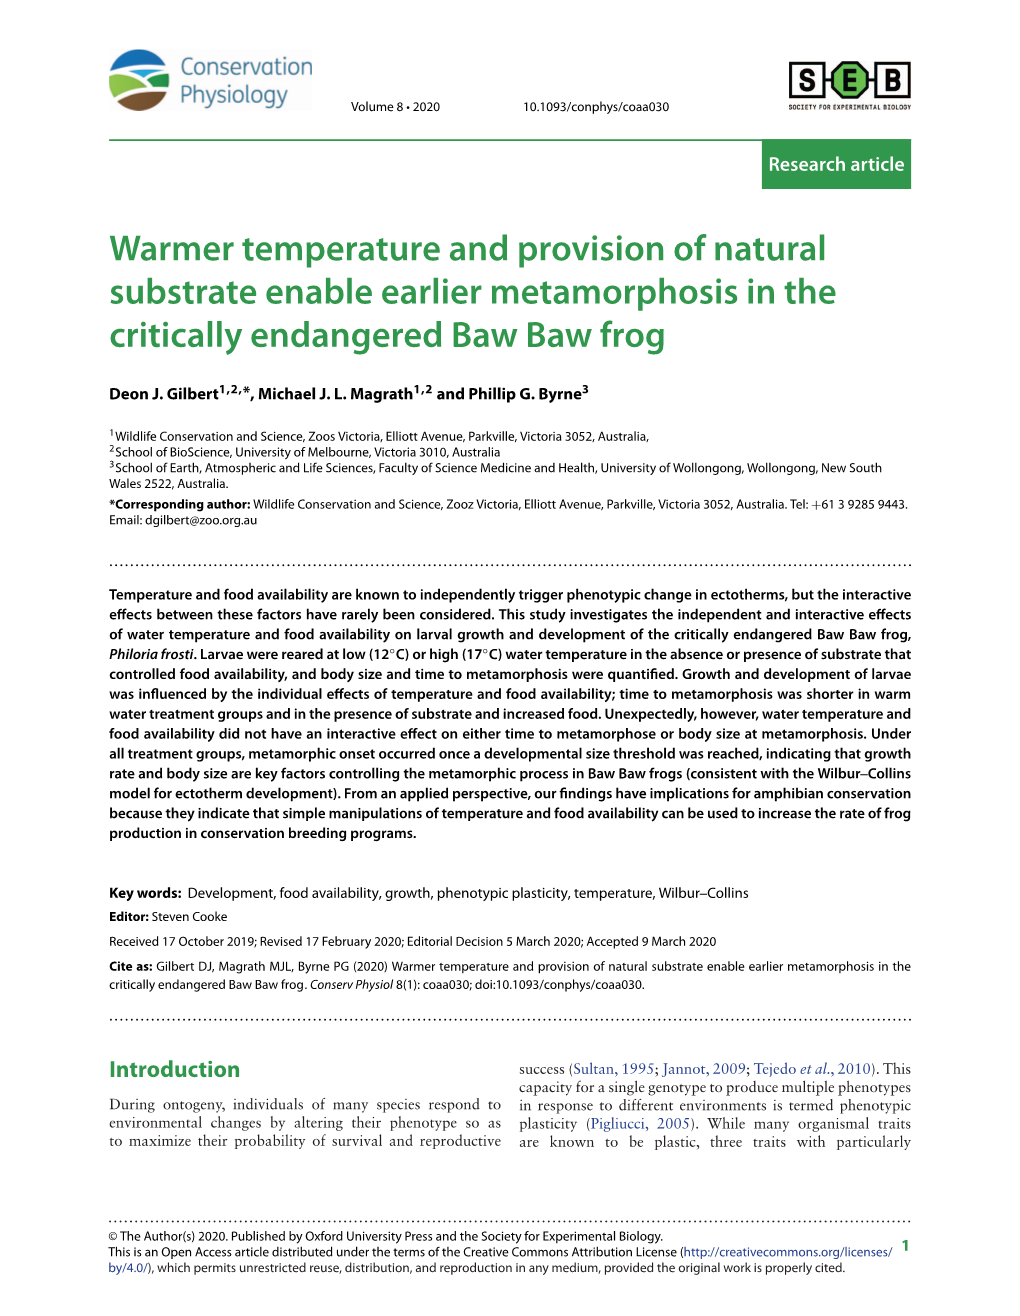 Warmer Temperature and Provision of Natural Substrate Enable Earlier Metamorphosis in the Critically Endangered Baw Baw Frog